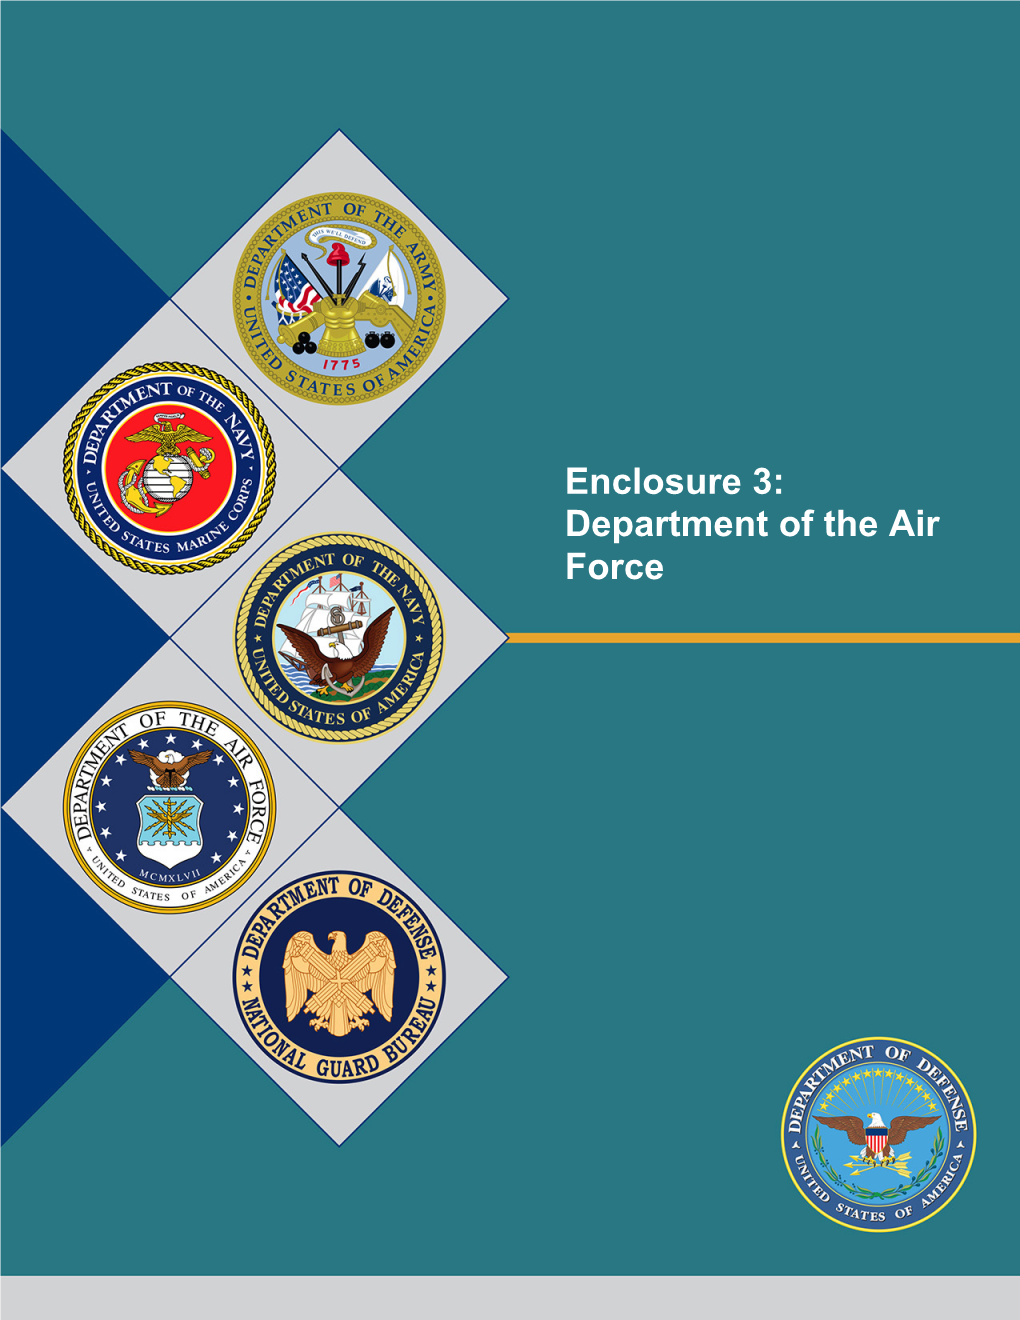 Enclosure 3: Department of the Air Force Report